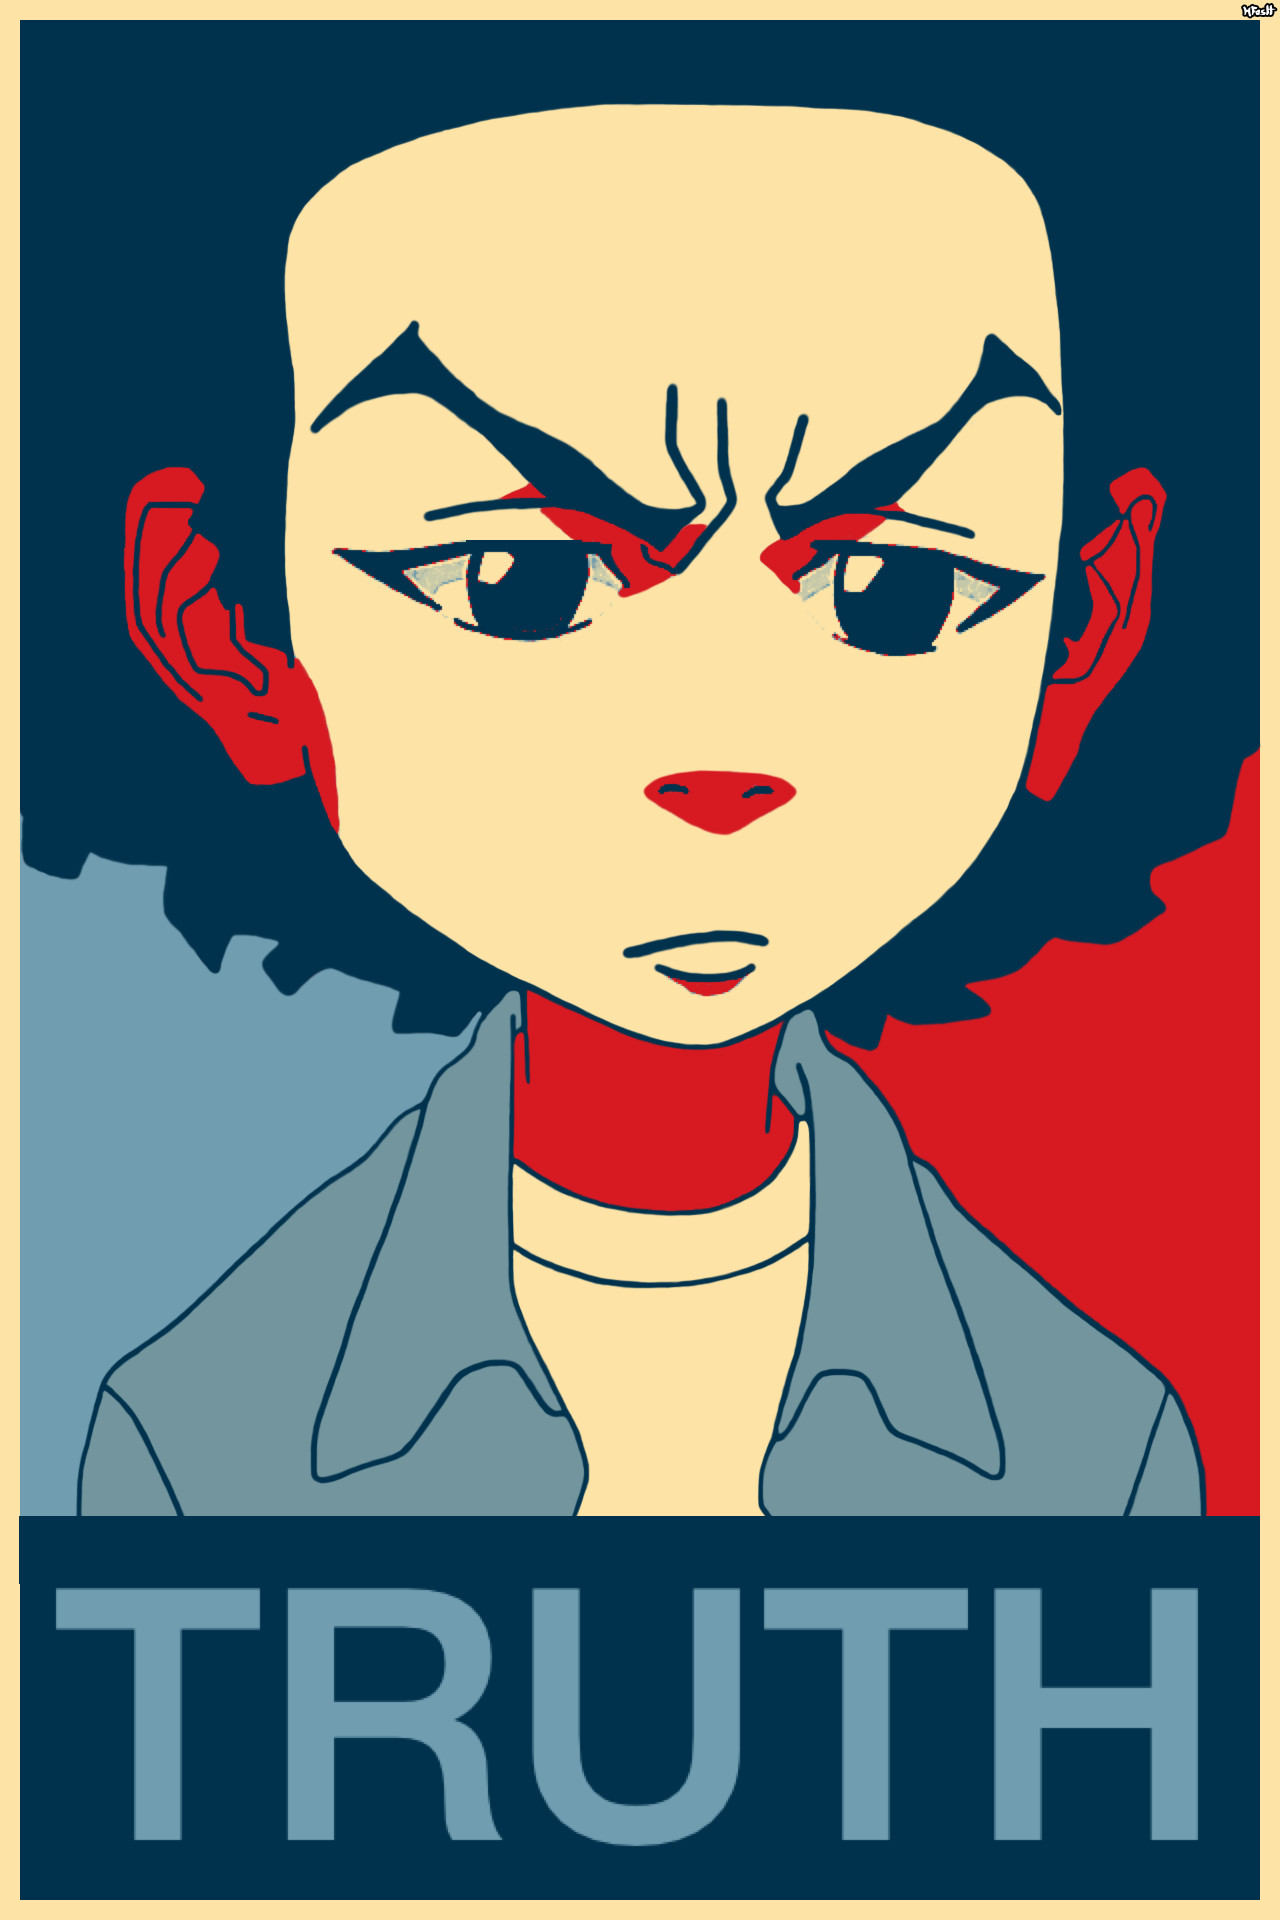 1280x1920 Huey Freeman Only Speaks The Truth / The Boondocks “What people need is the  truth